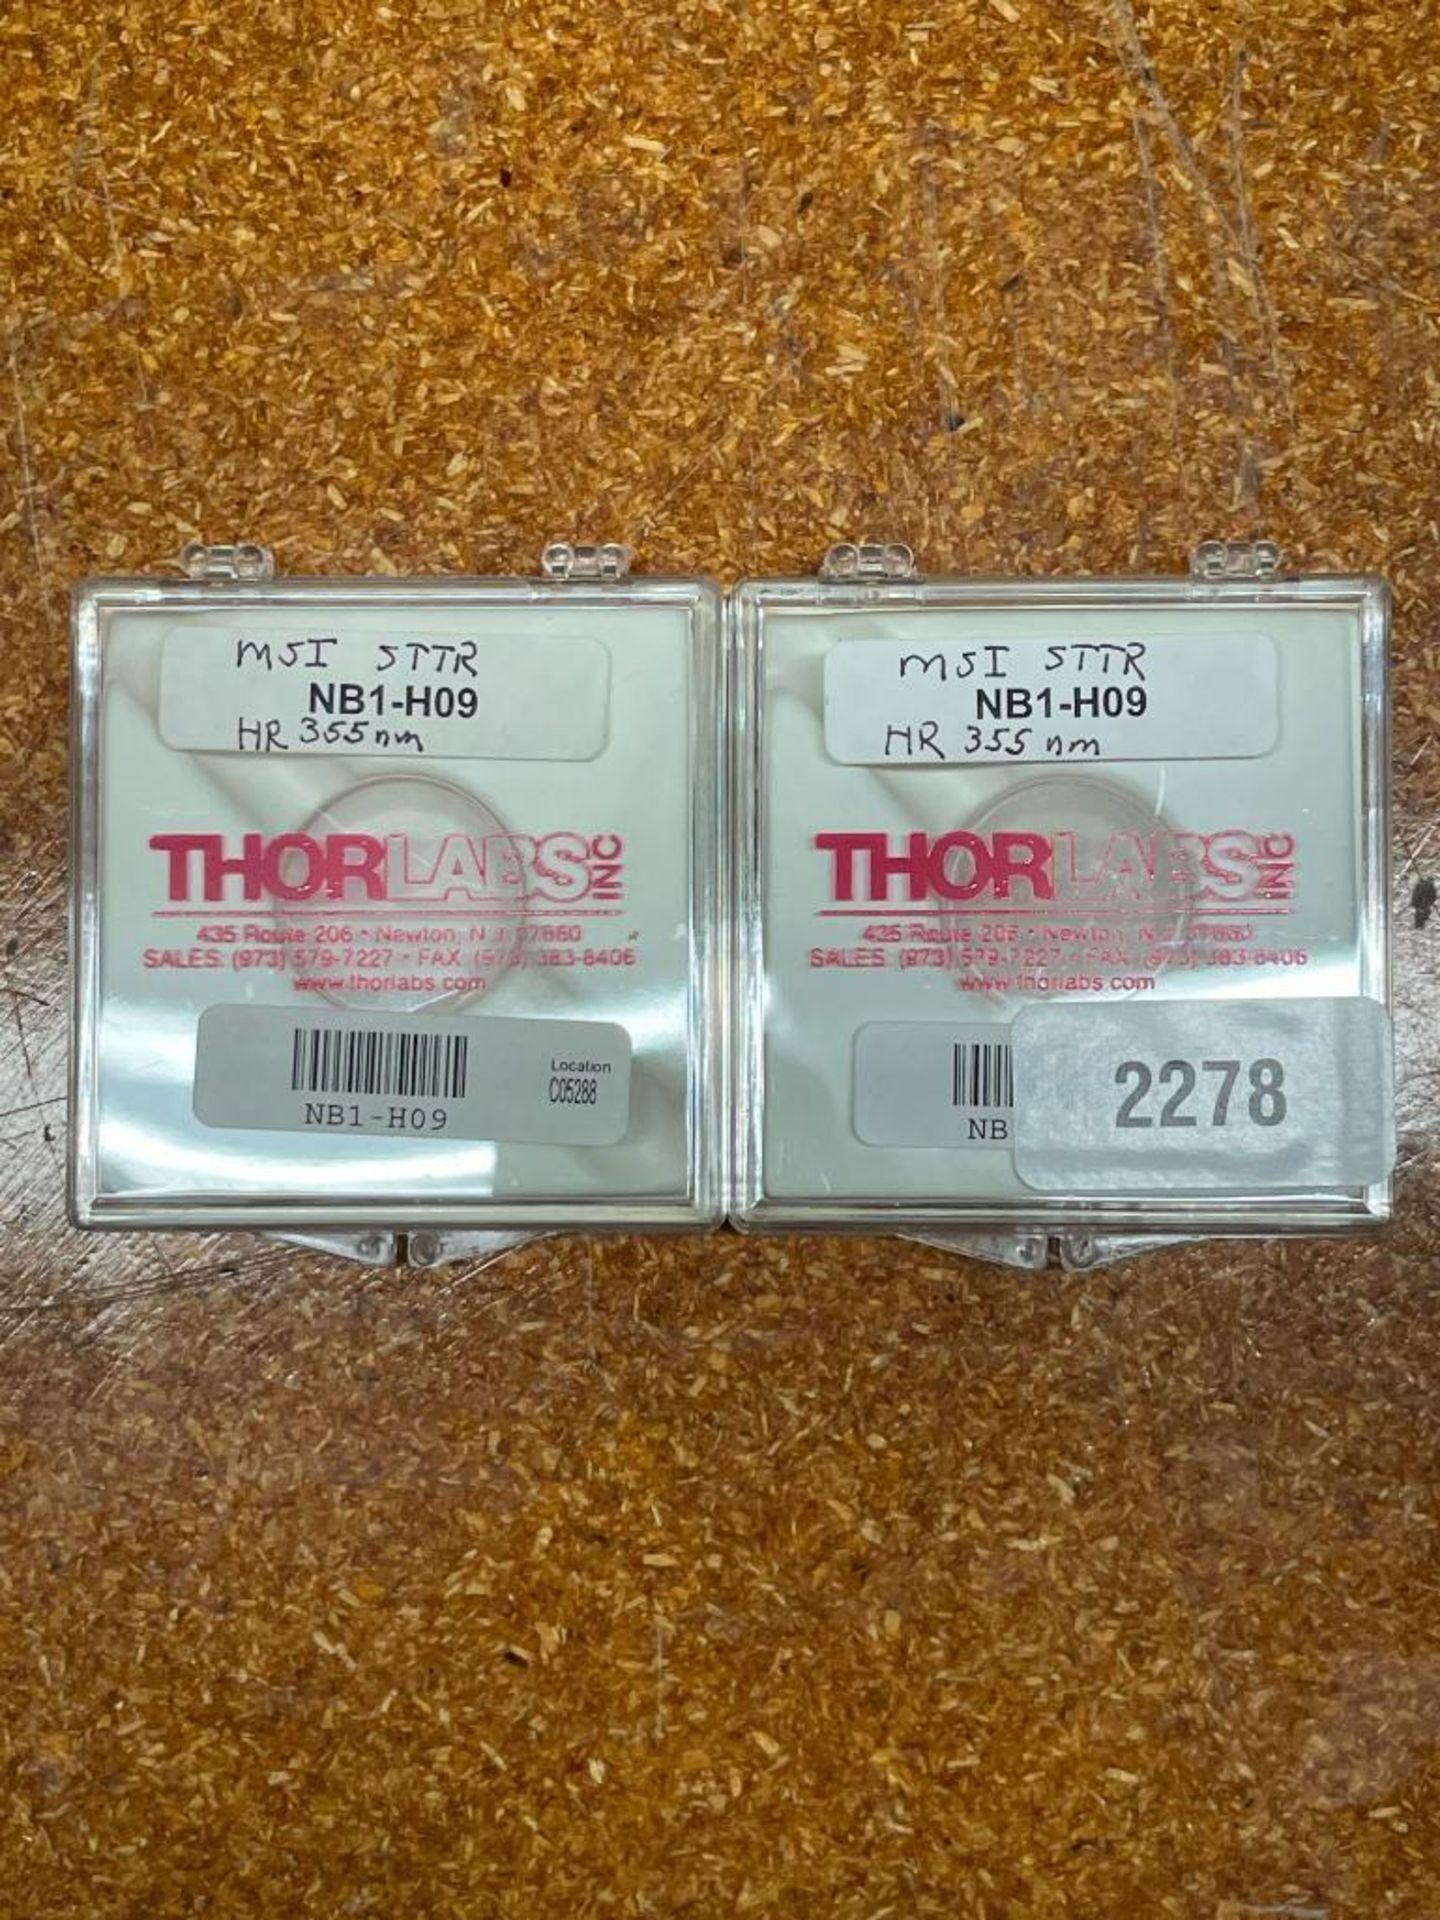 (2) 1" THIN FILM MIRRORS BRAND/MODEL: THORLABS INFORMATION: HR AT 352 nm QTY: 1 - Image 2 of 2